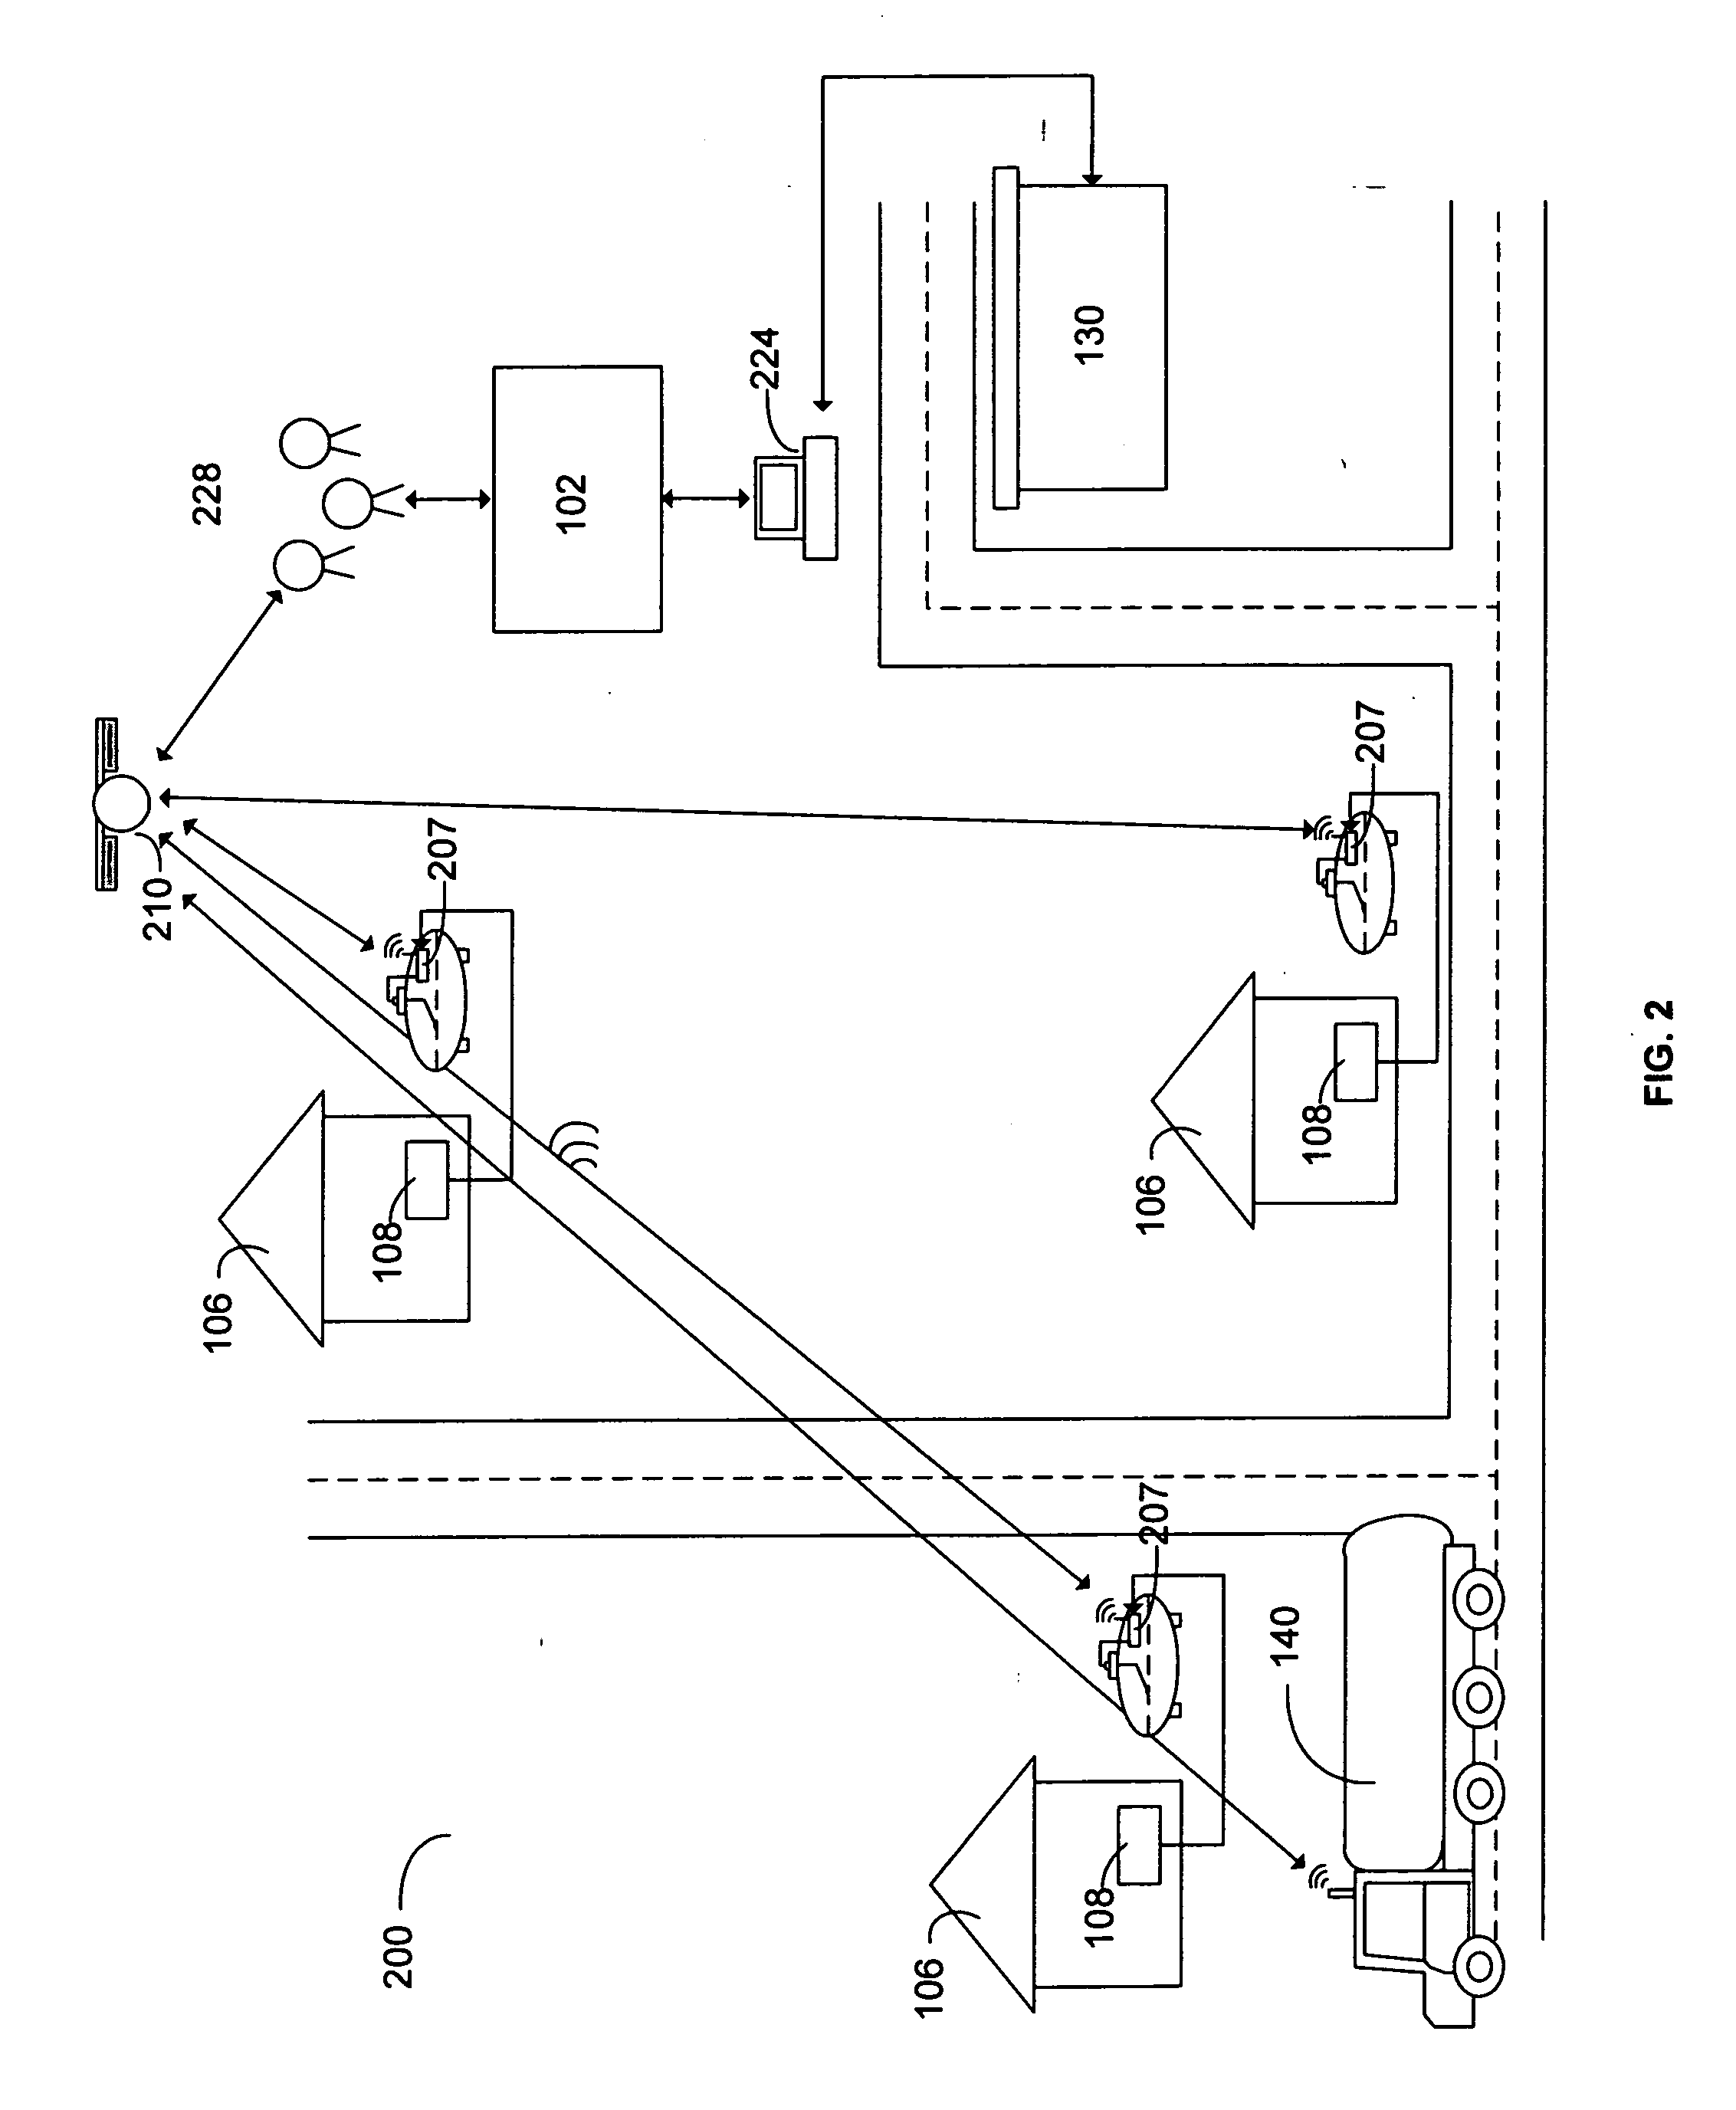 System for delivering propane or other consumable liquid to remotely located storage tanks